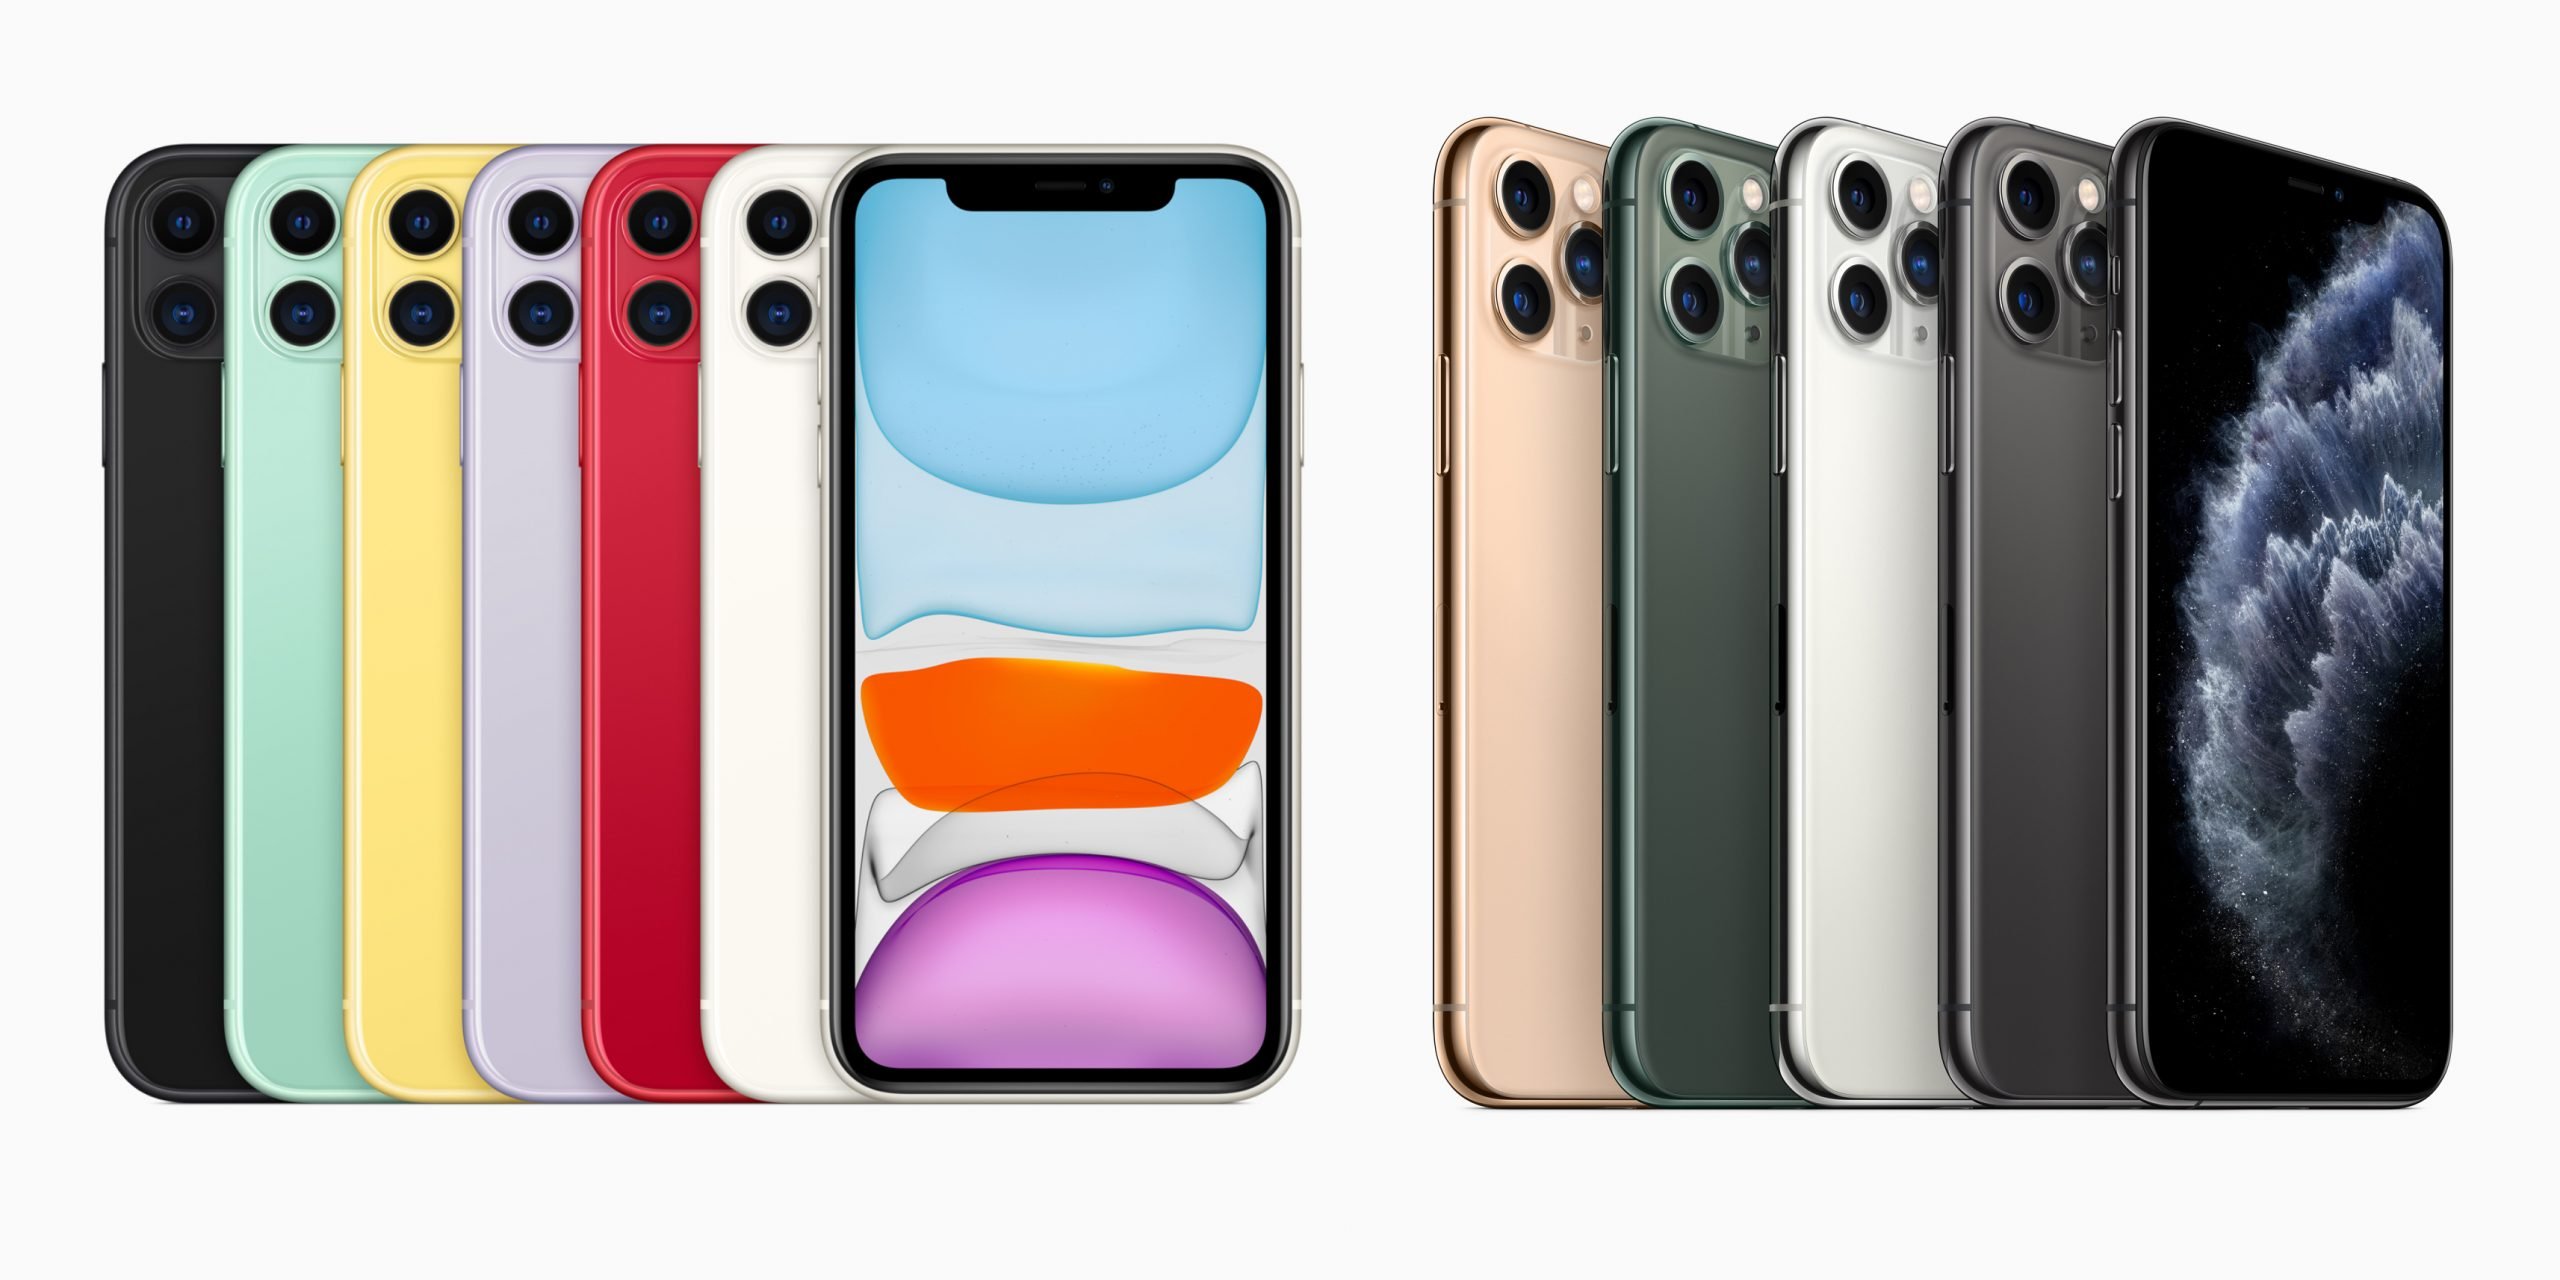 iPhone 11 vs iPhone 11 Pro comparison: Which should you ...